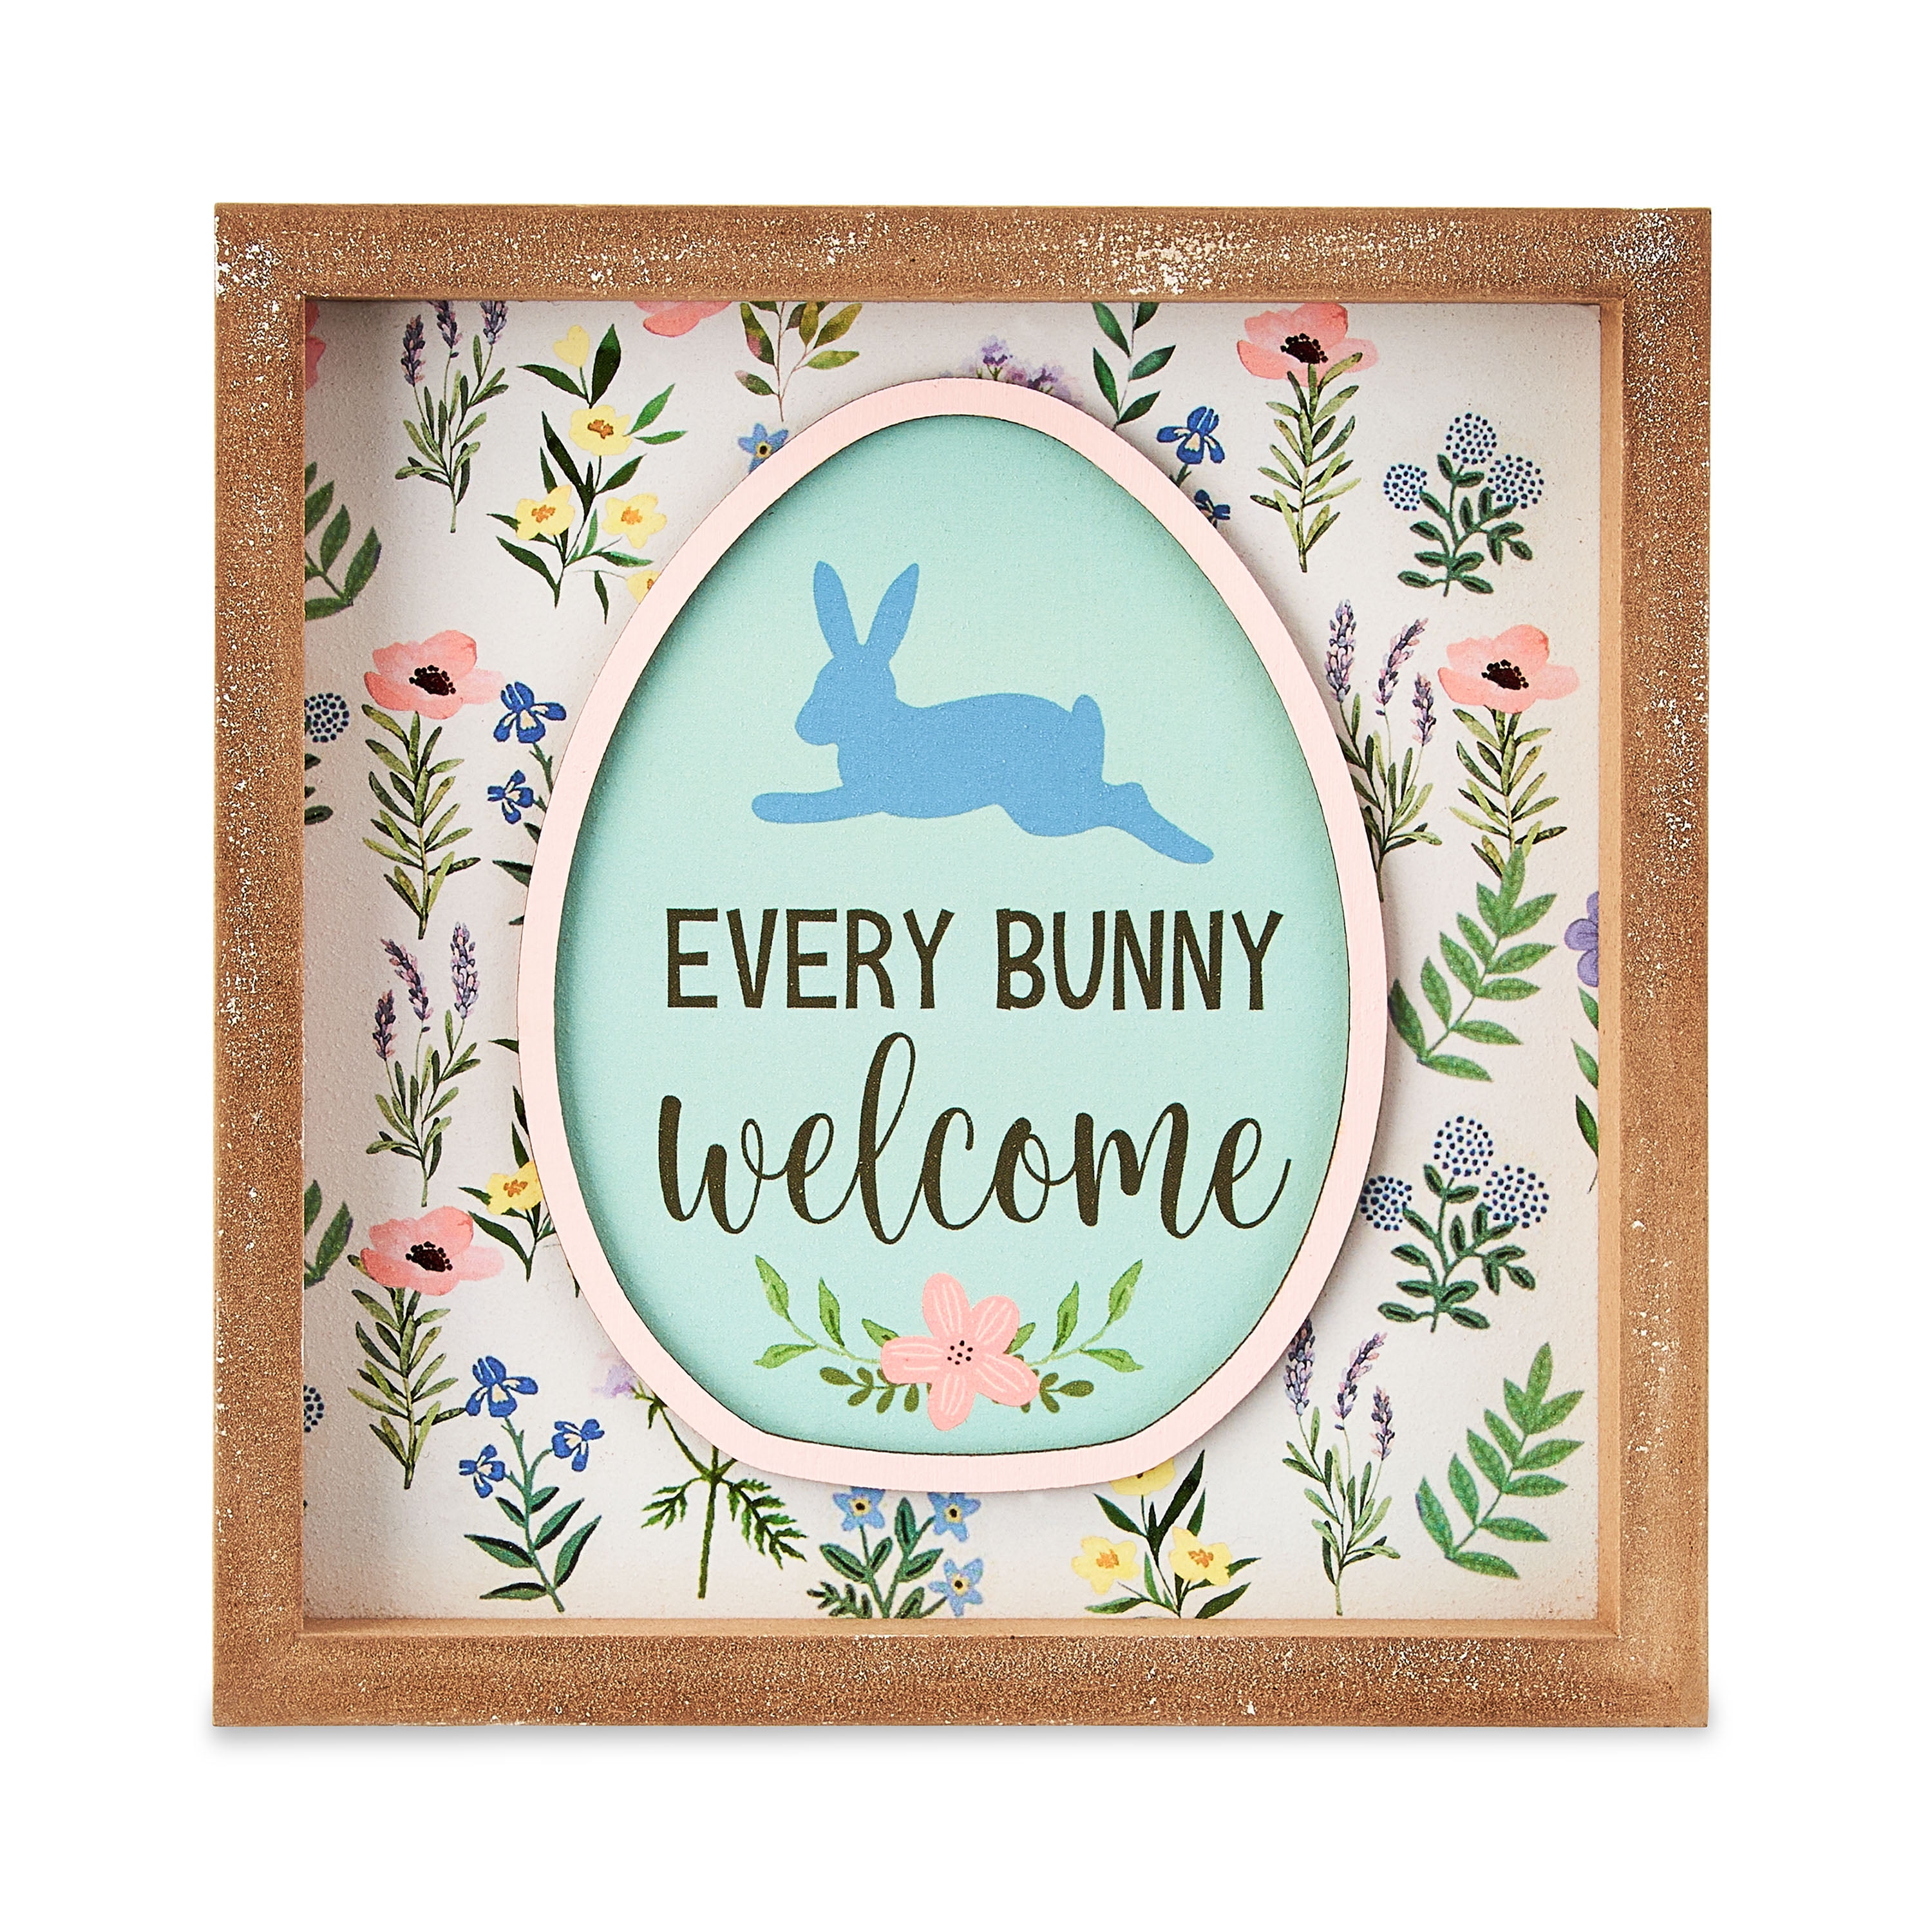 Way To Celebrate Easter Every Bunny Welcome Hanging Wall Decor, 6"